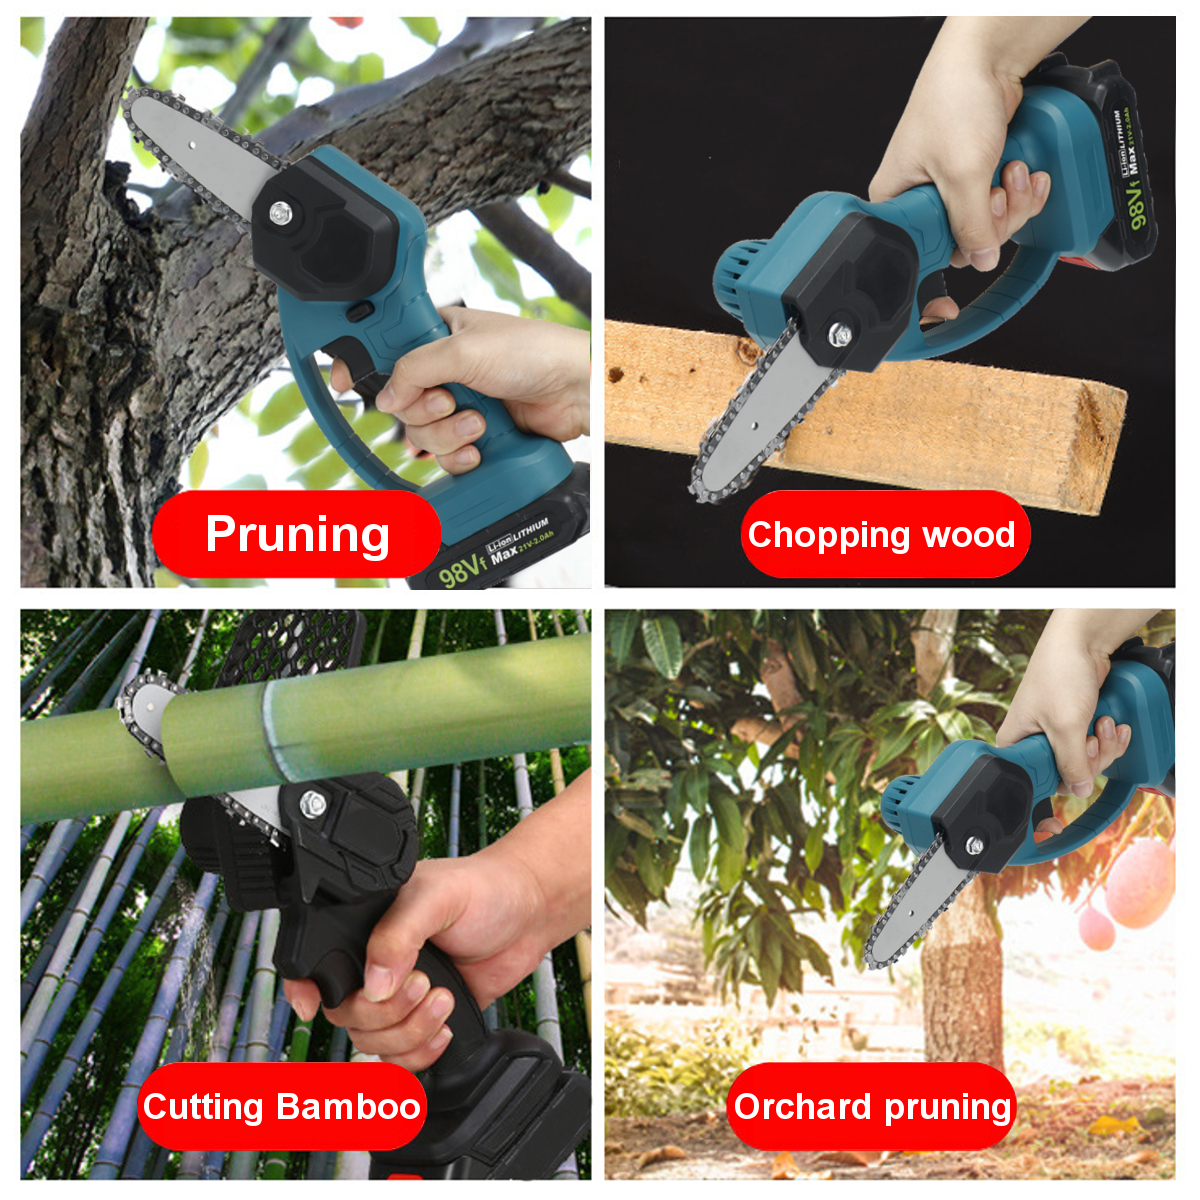 550W-21V-4inch-One-Hand-Woodworking-Electric-Chain-Saw-Wood-Cutter-Cordless-1807129-2